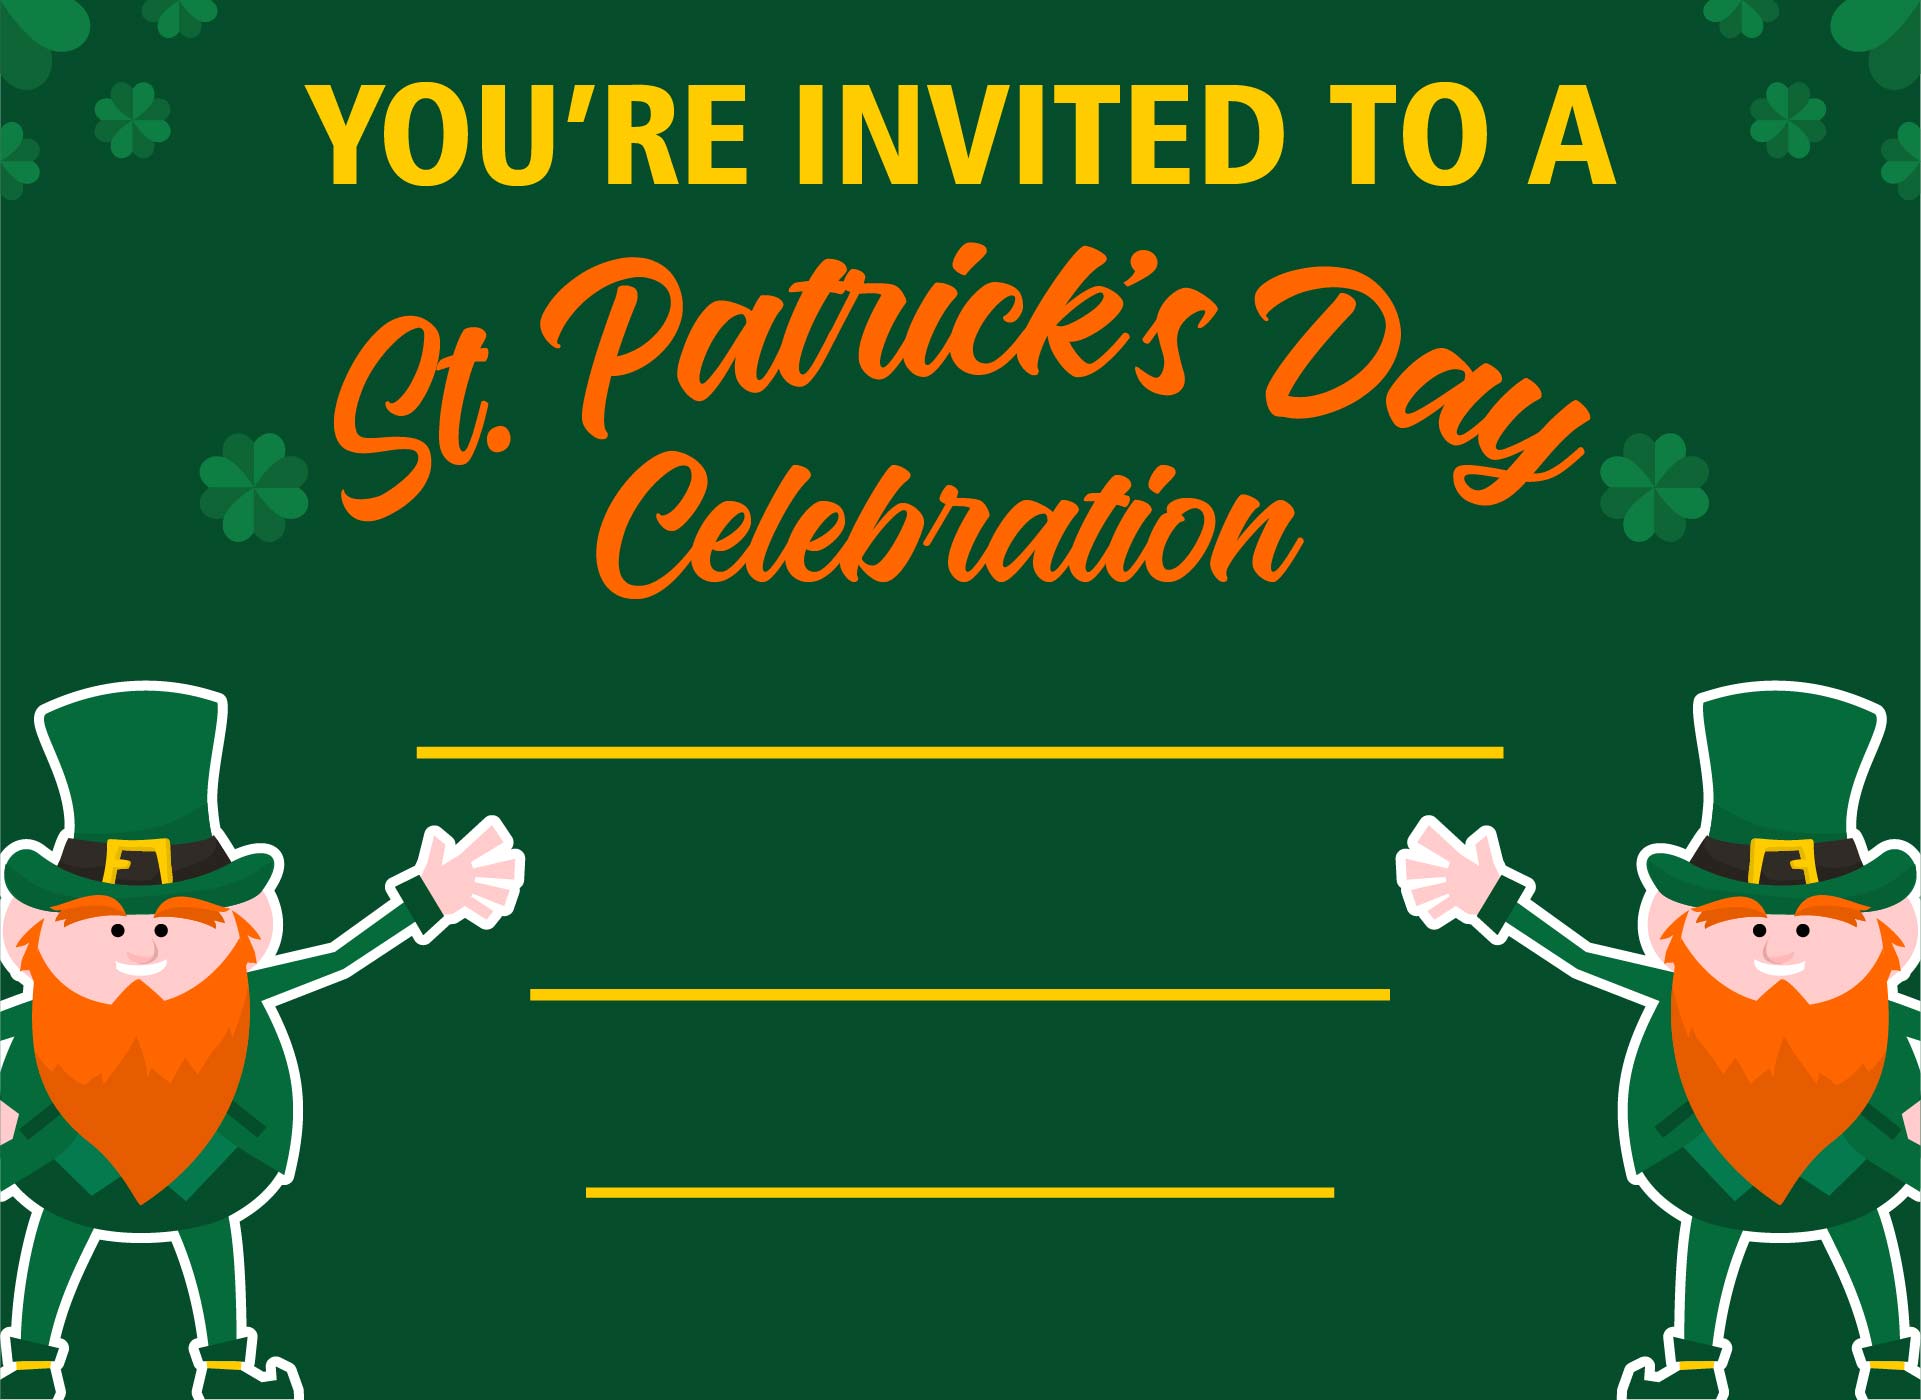 5 Best Images of St Patrick s Day Templates Printables  St Patrick s  